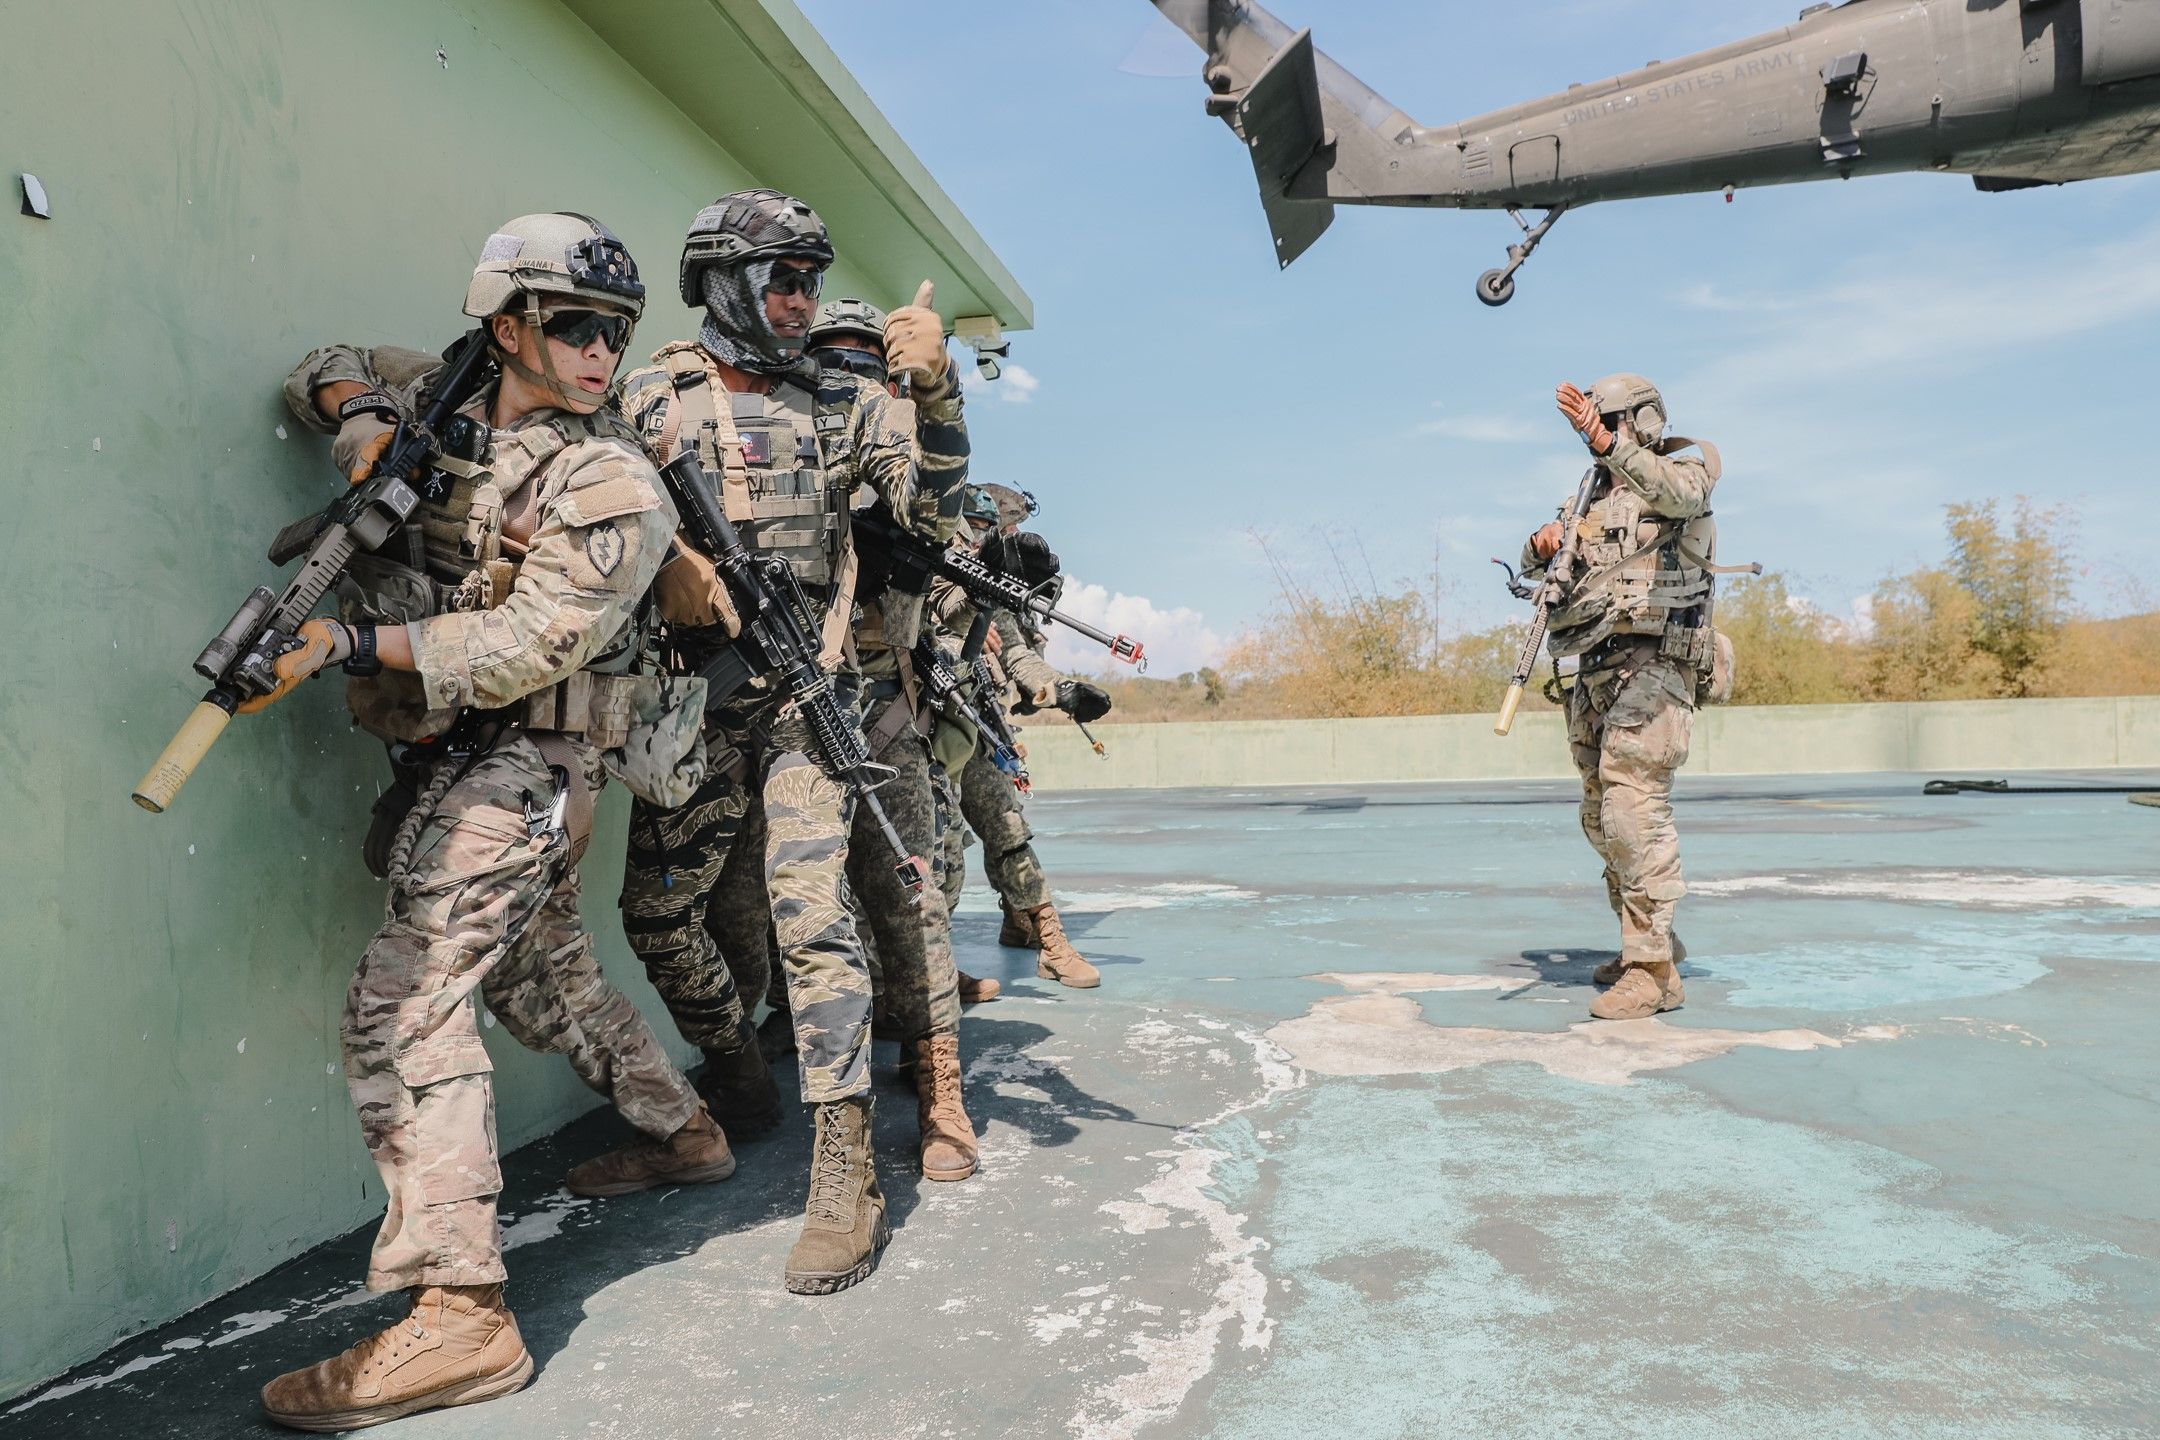 Elite members of the Philippine Army (PA) Light Reaction Regiment (LRR), Filipino Scout Ranger Regiment (FSRR), PA Special Forces, US Army 75th Ranger Regiment, US Special Forces (SF), and the 1-27IN "Wolfhounds" conduct a fast rope insertion (FRIES) onto a rooftop, before entering and clearing the building below to rescue and extract two hostages.